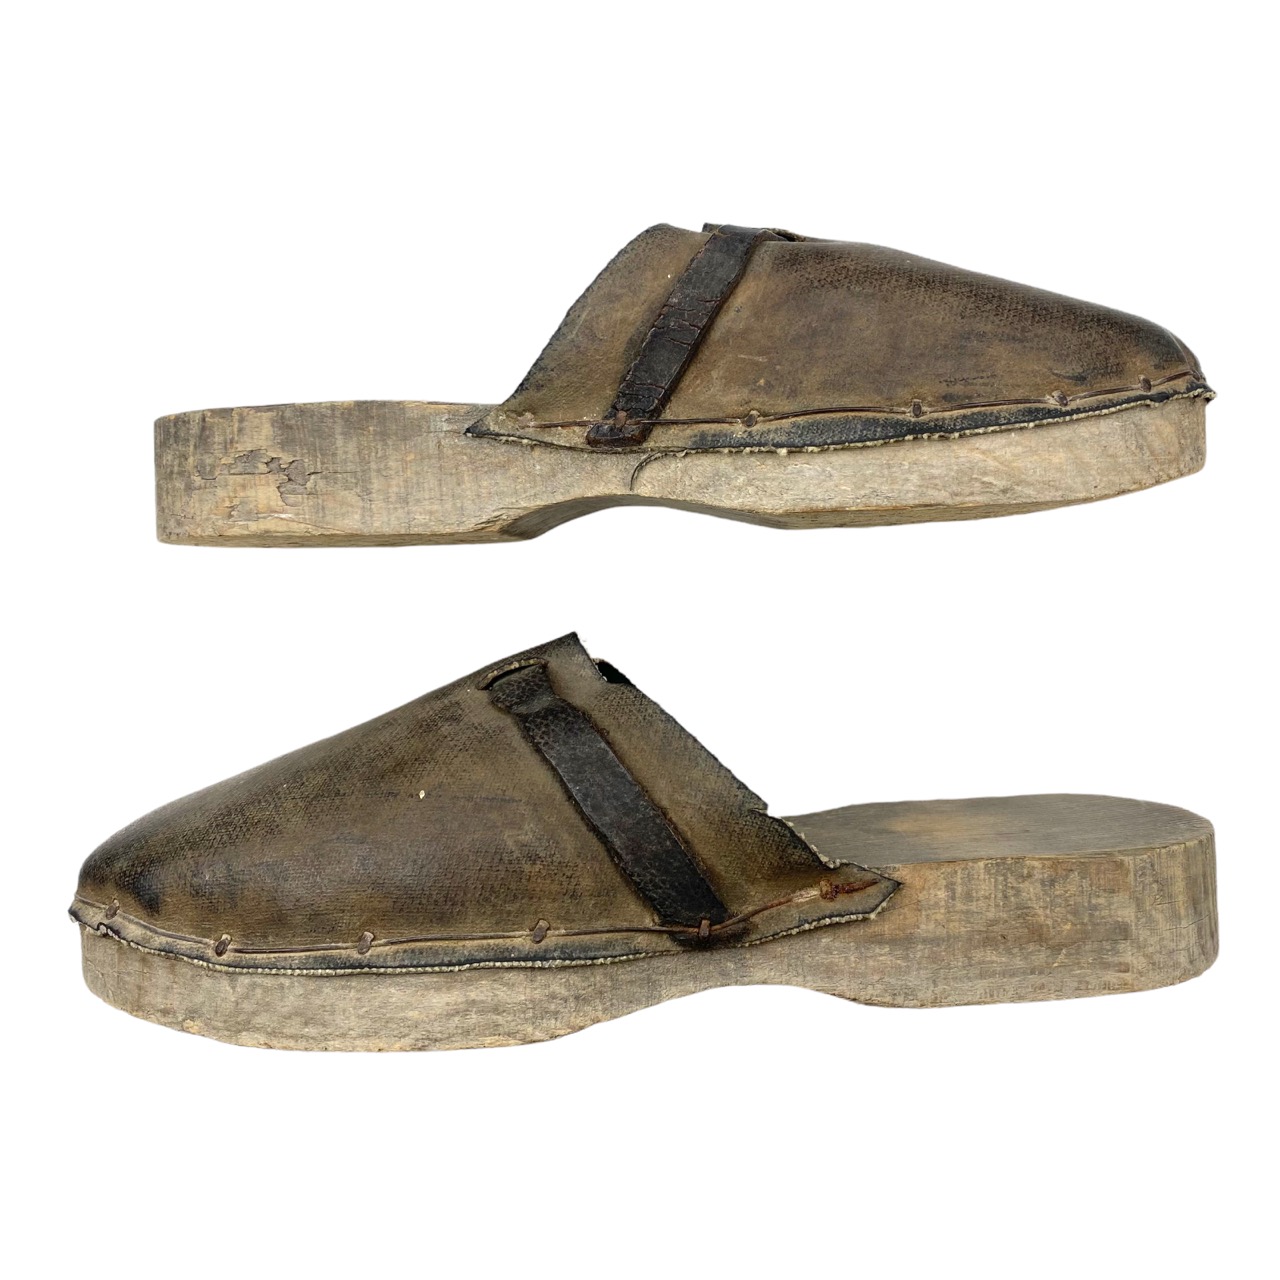 Concentration camp male inmates shoes – Holocaust Archive